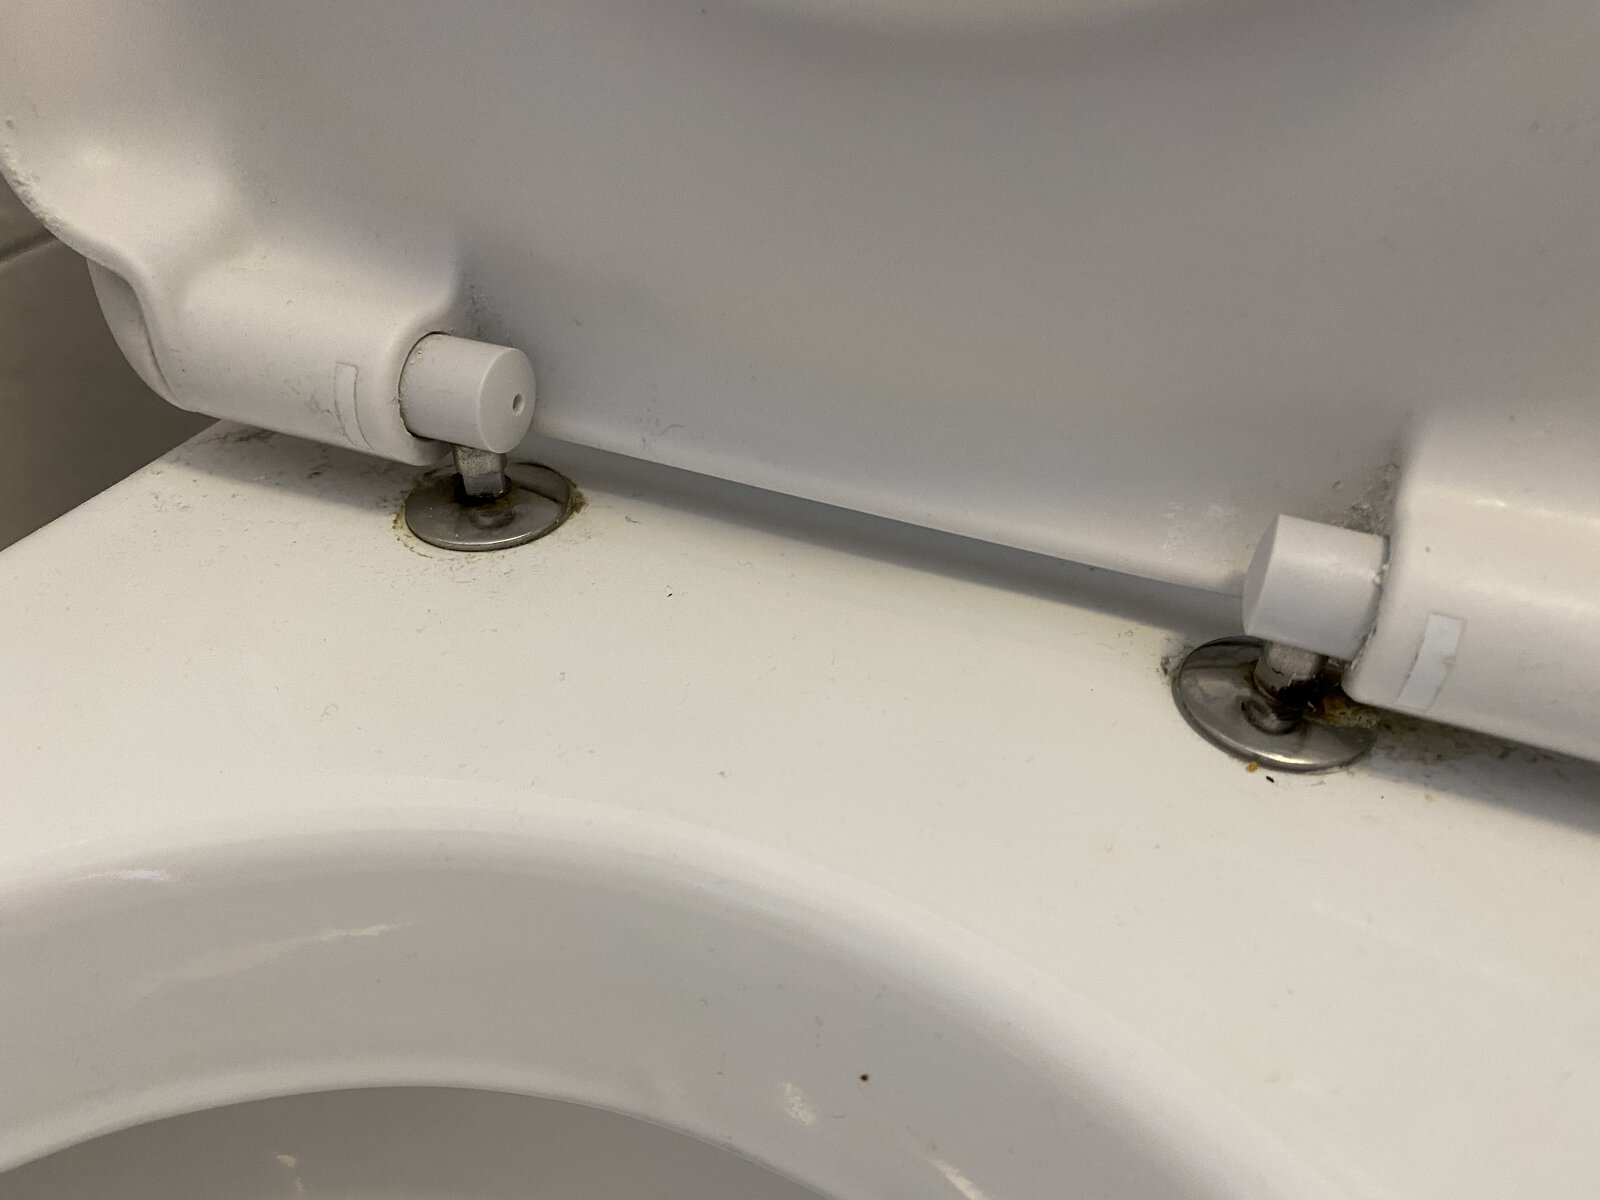 How do I remove this toilet seat?! | DIYnot Forums